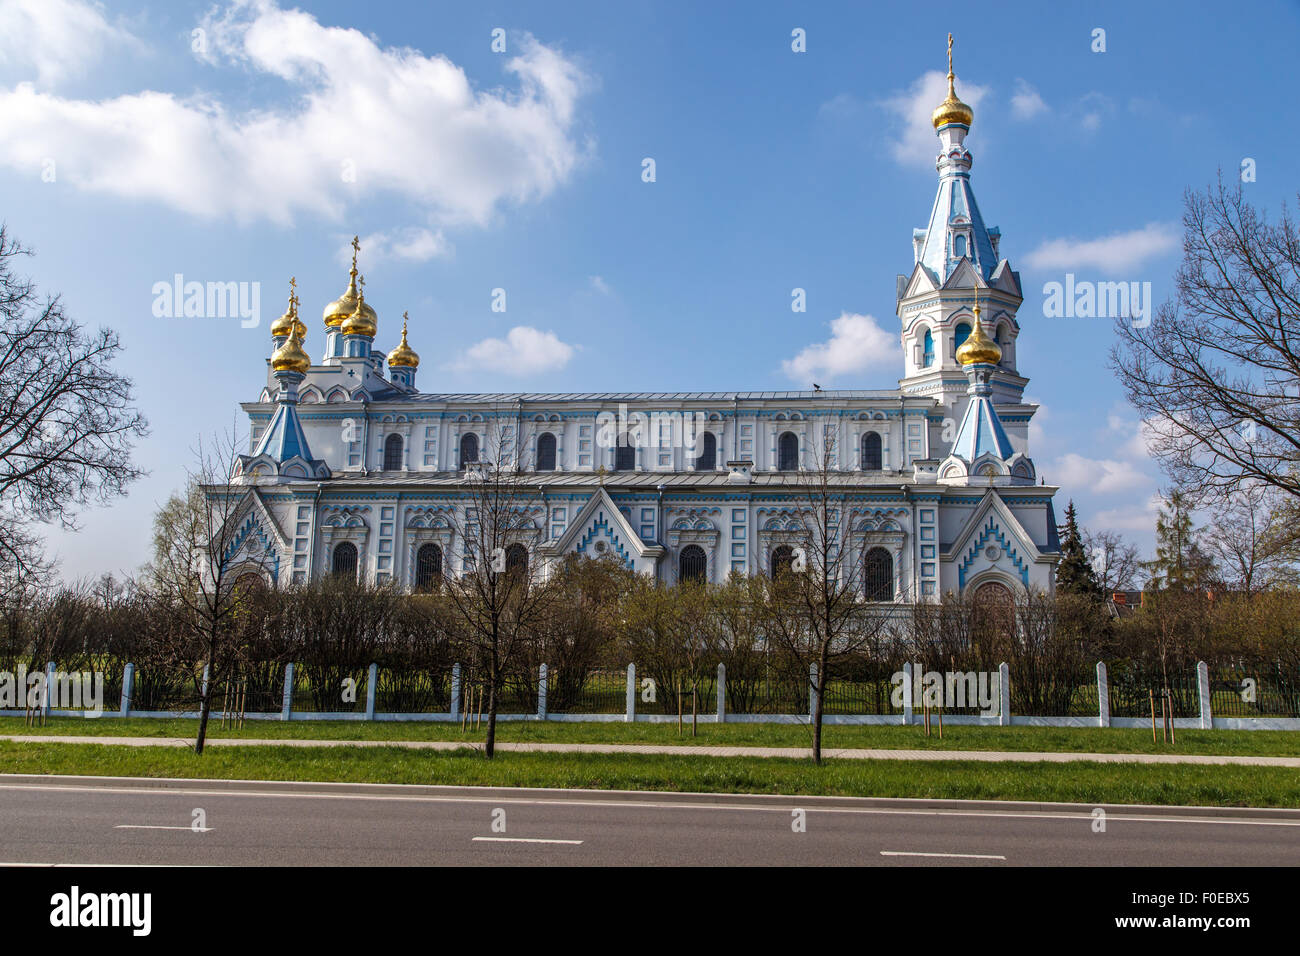 Front view of Orthodox Ss Boris and Gleb Cathedral in Dougavpils, Latvia, on blue cloudy sky background. Stock Photo